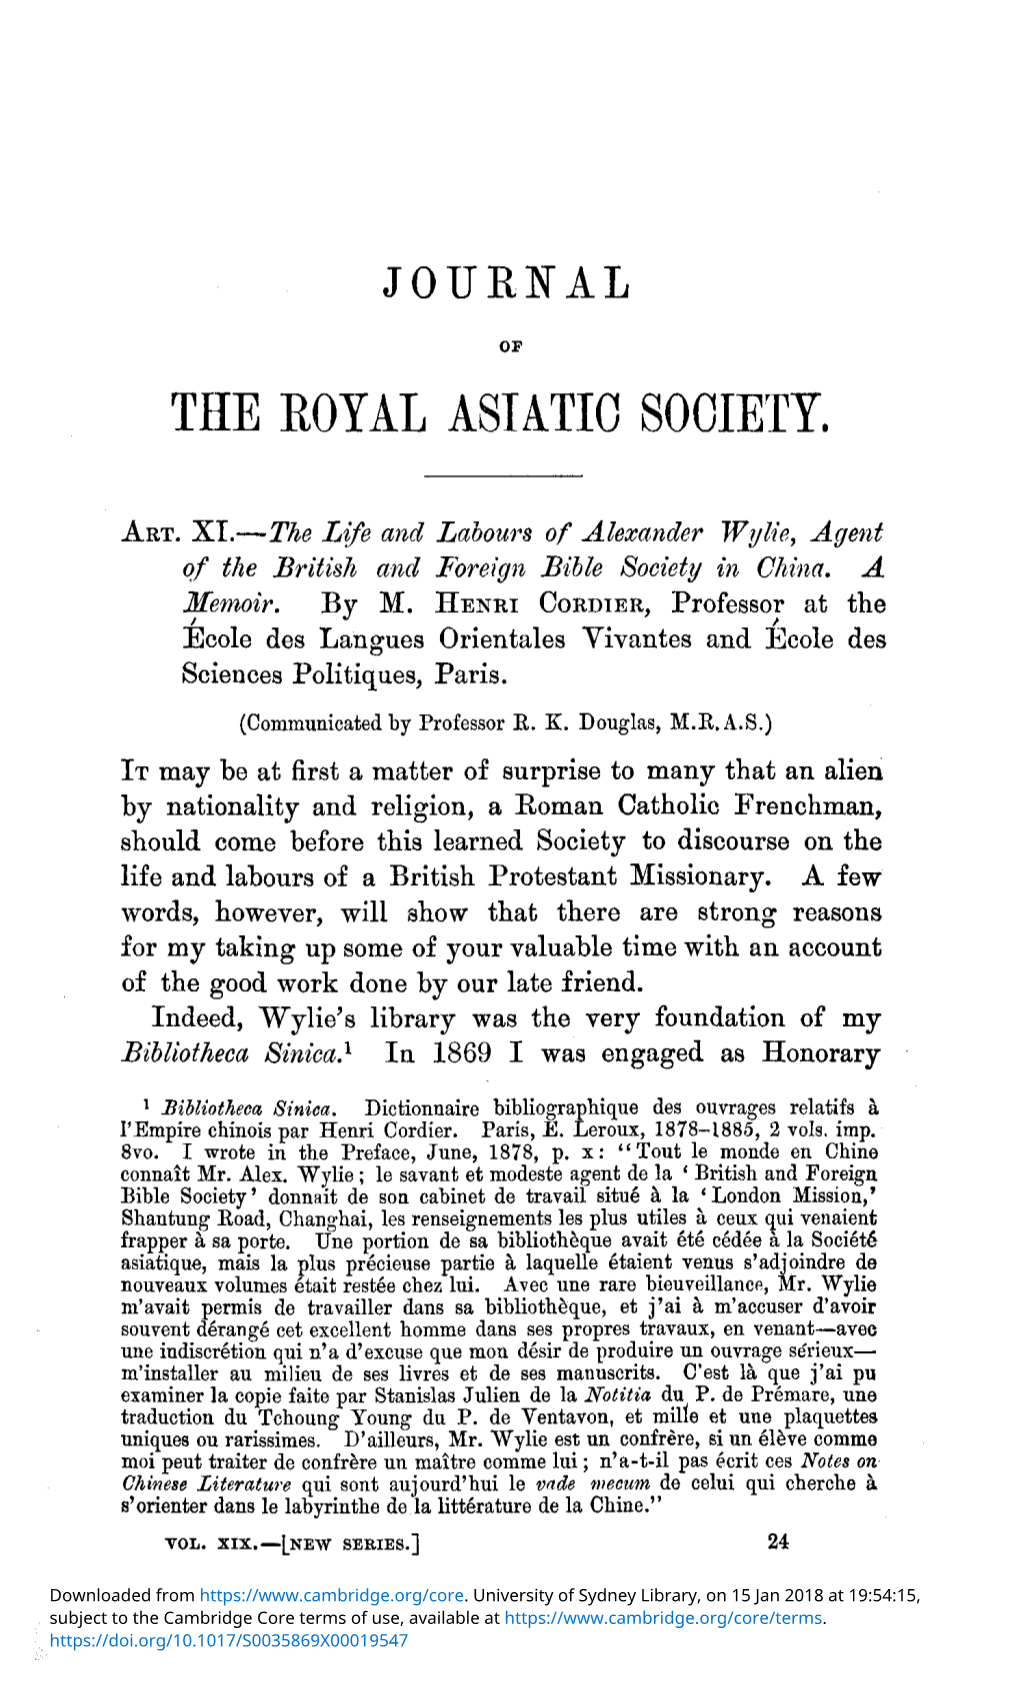 The Royal Asiatic Society